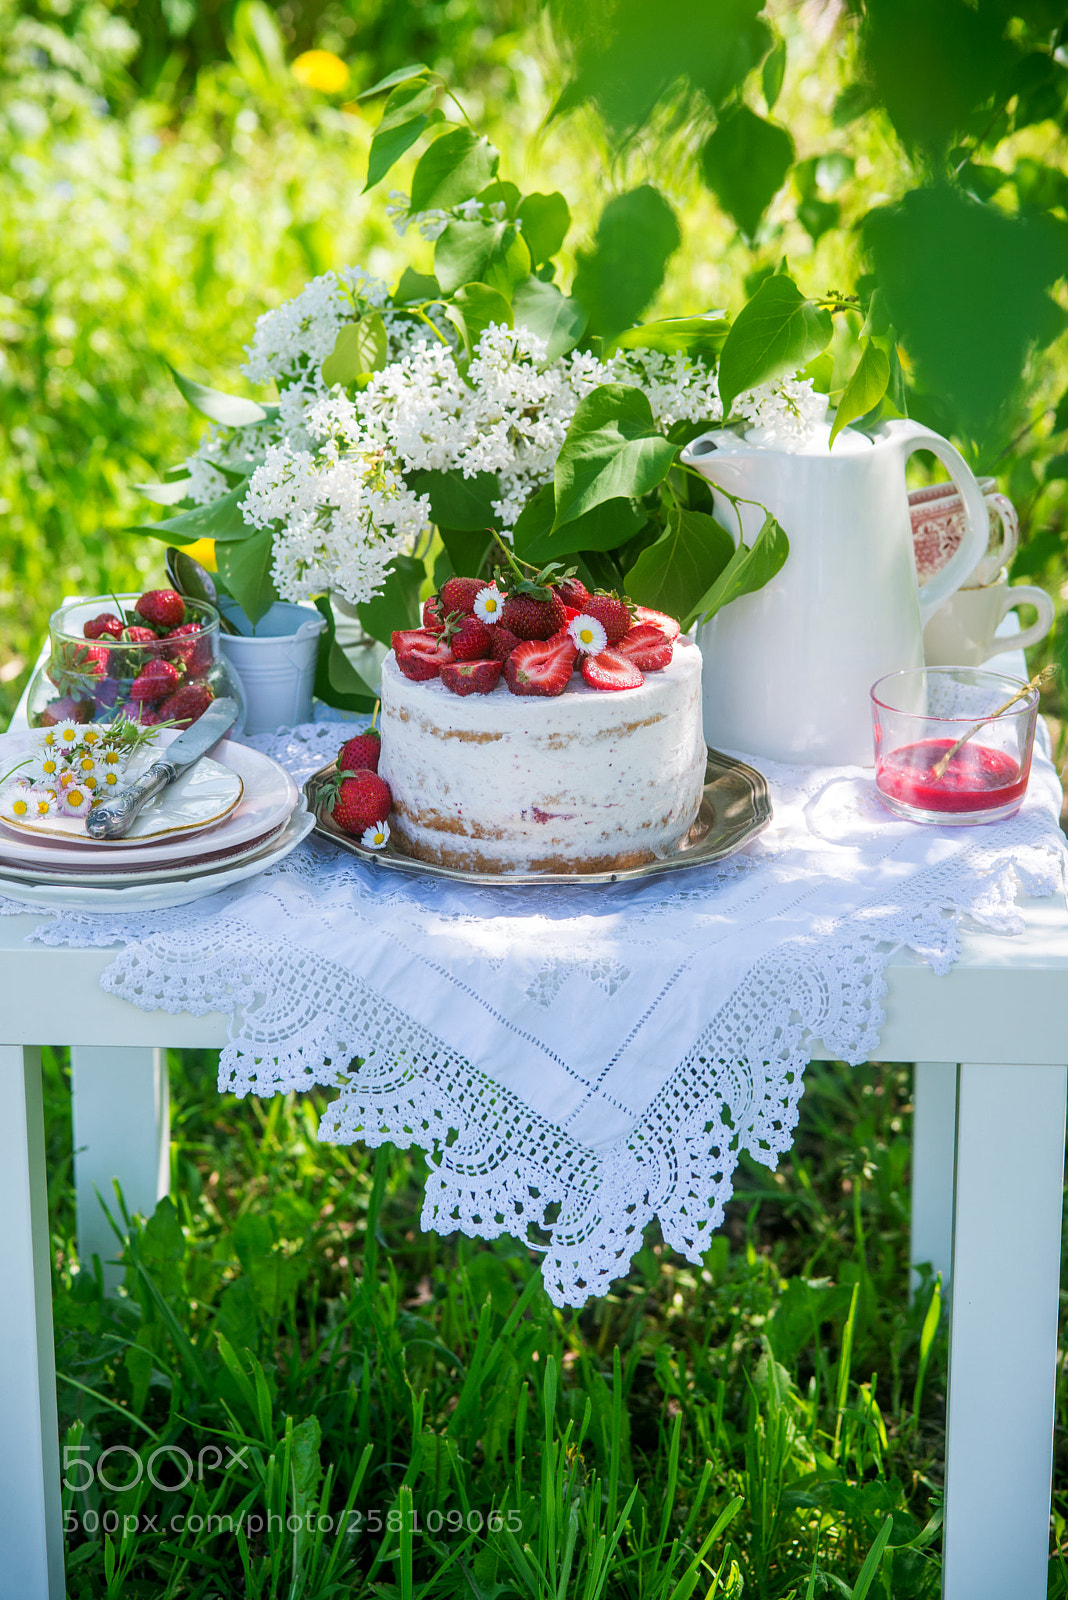 Nikon D600 sample photo. Strawberry cake in a photography